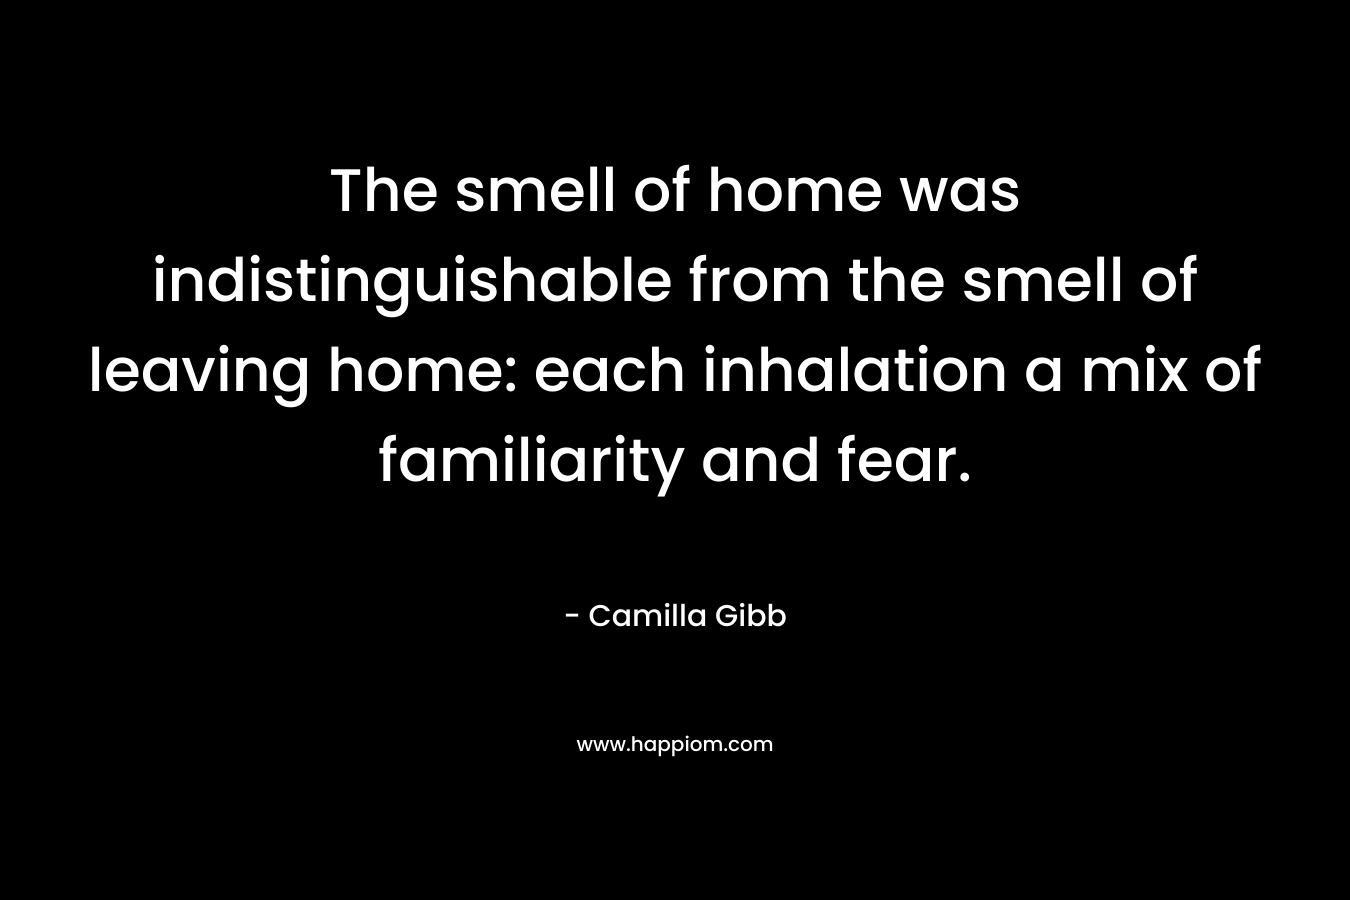 The smell of home was indistinguishable from the smell of leaving home: each inhalation a mix of familiarity and fear. – Camilla Gibb